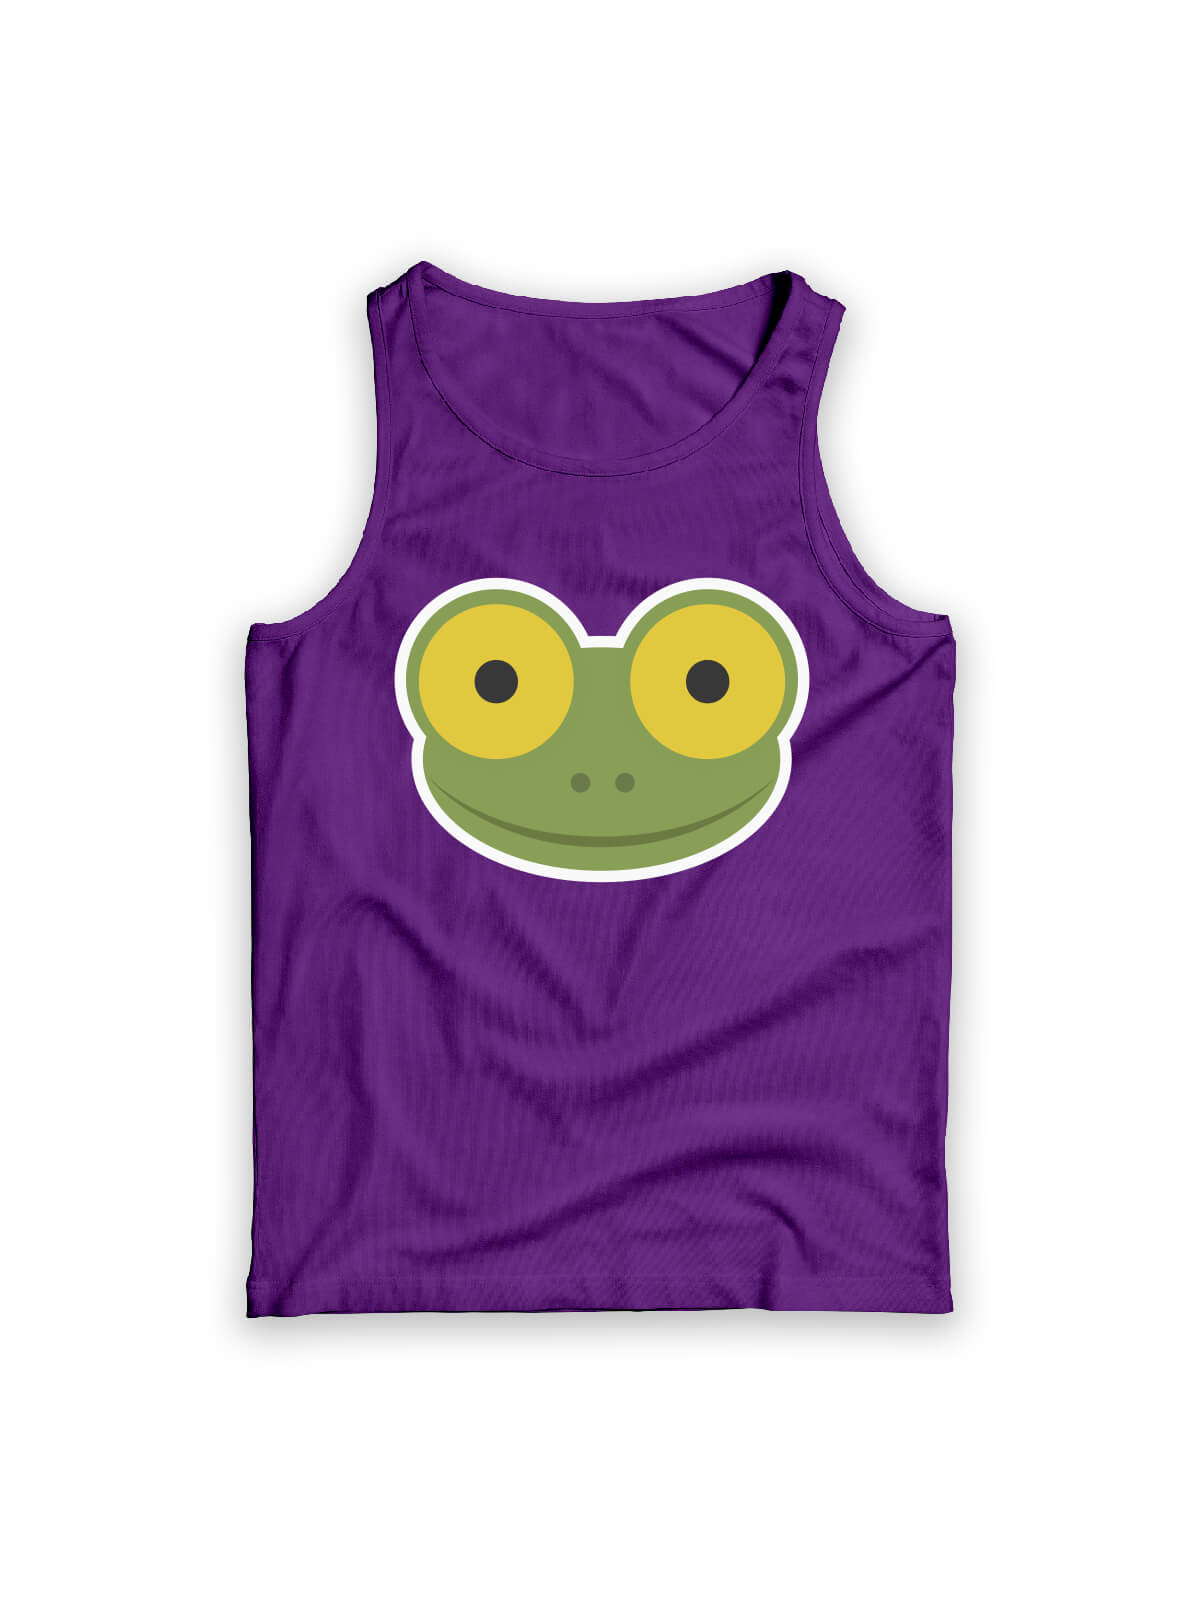 purple t-shirt with Mike the frog face